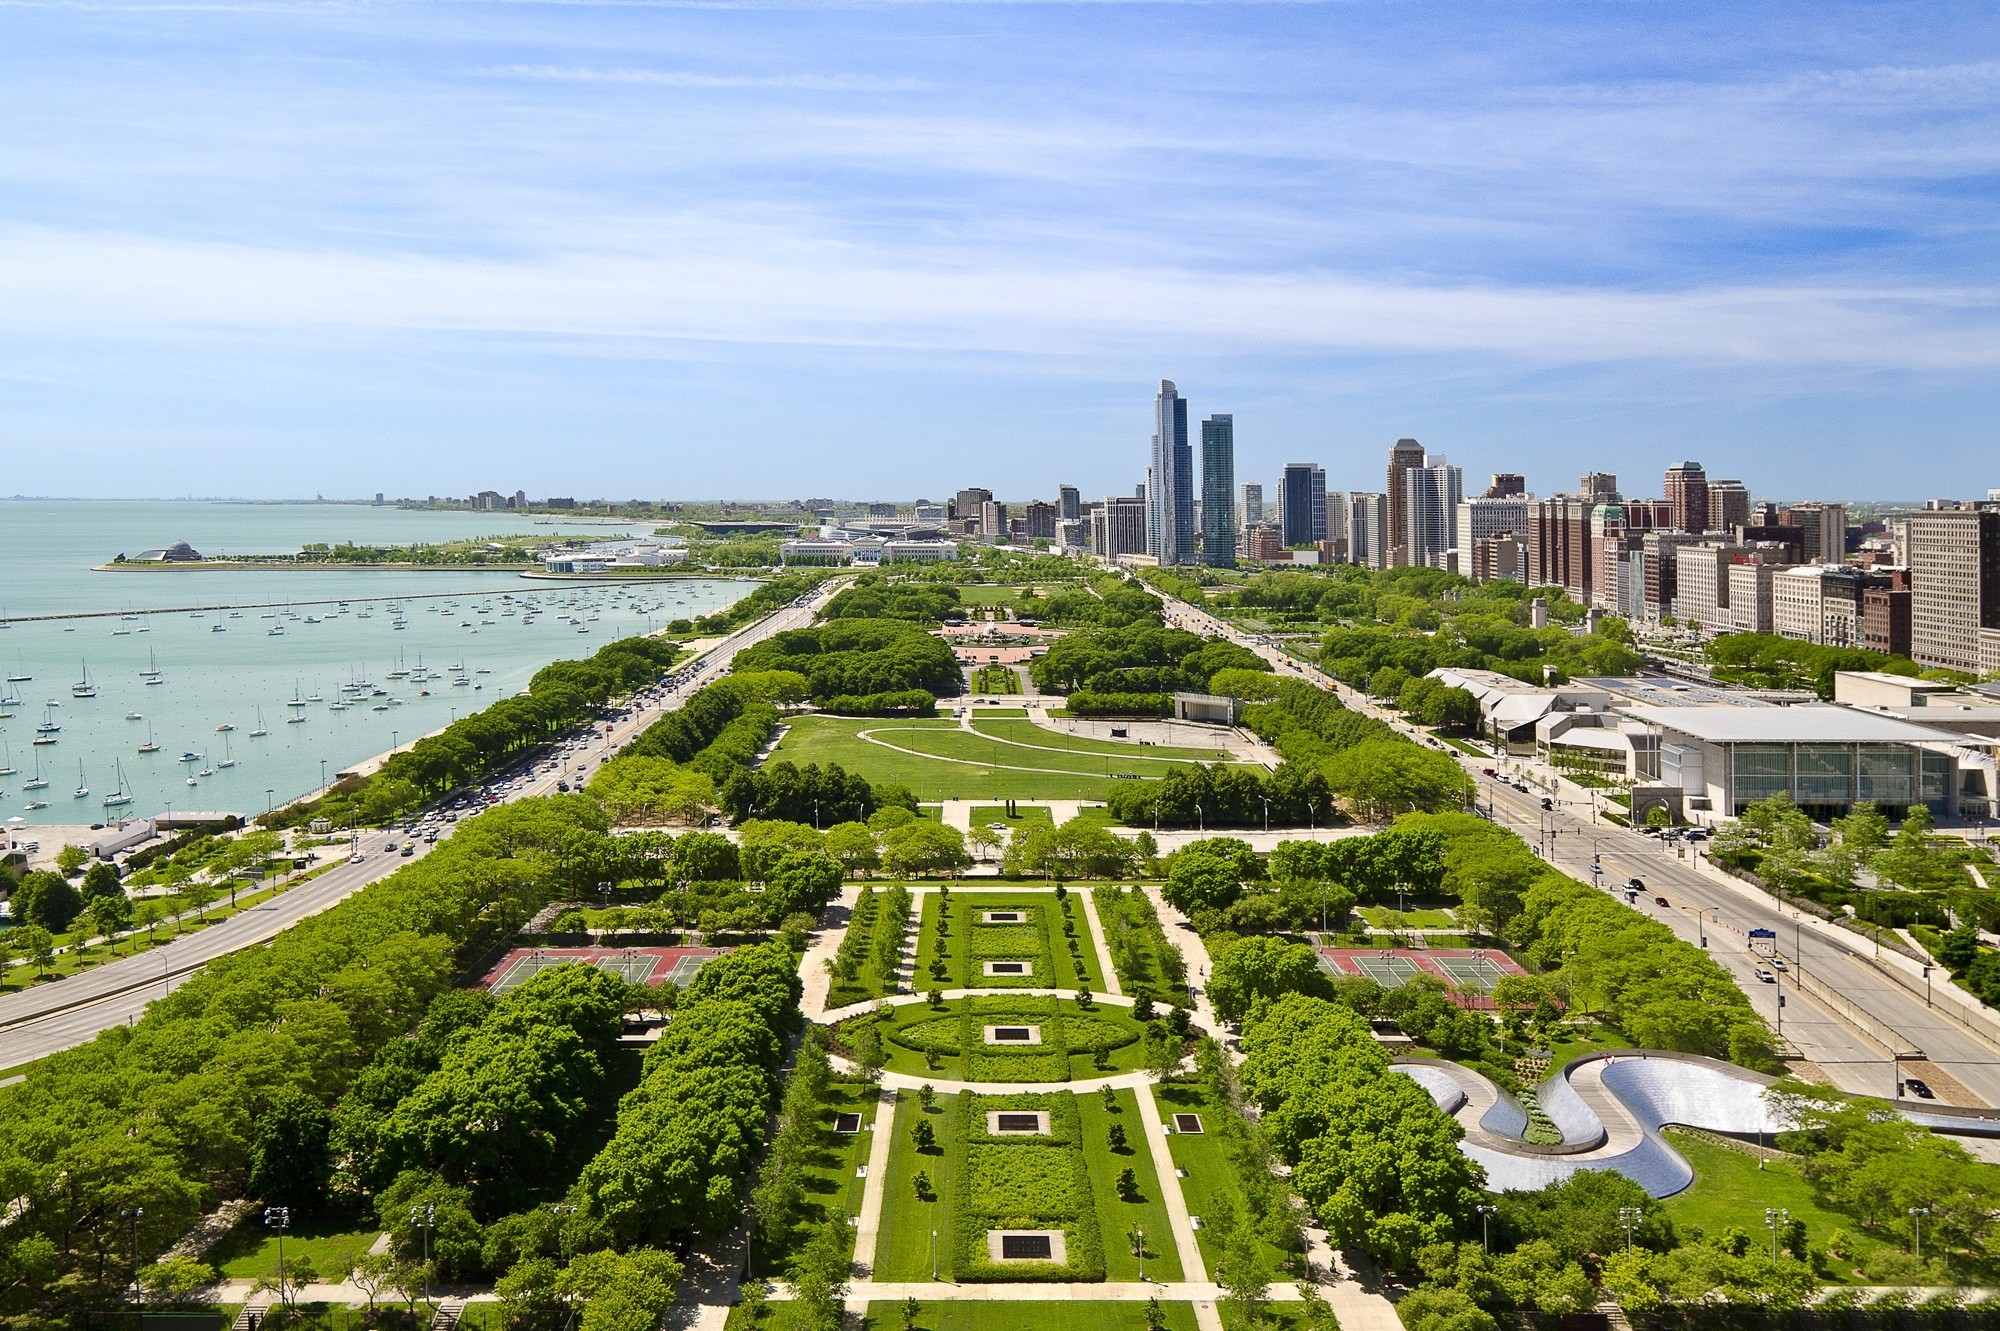 General 2000x1331 Chicago USA cityscape city park calm daylight aerial view